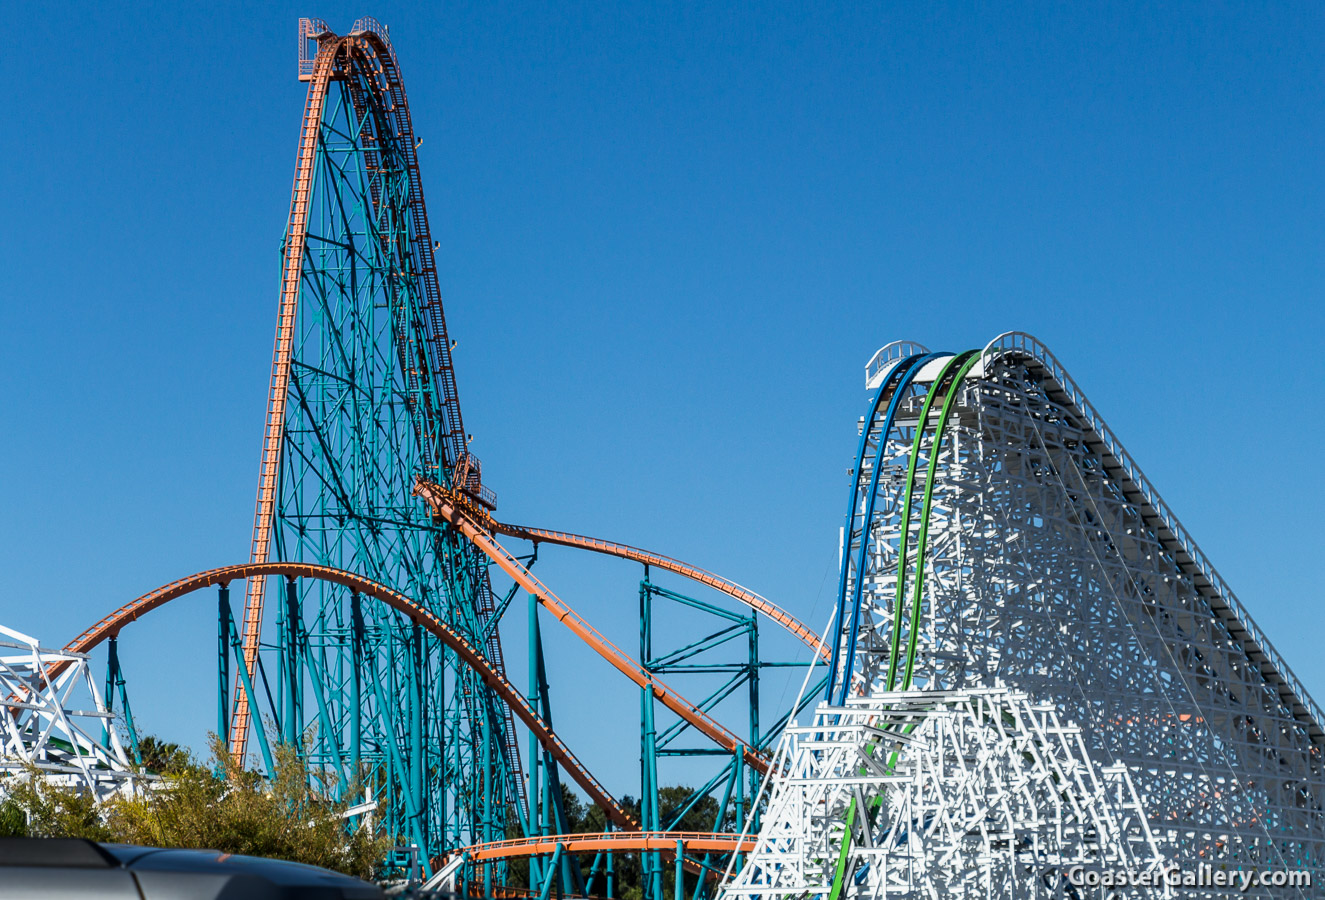 A list of the world's tallest roller coasters, hypercoasters, Giga Coasters, and Strata Coasters